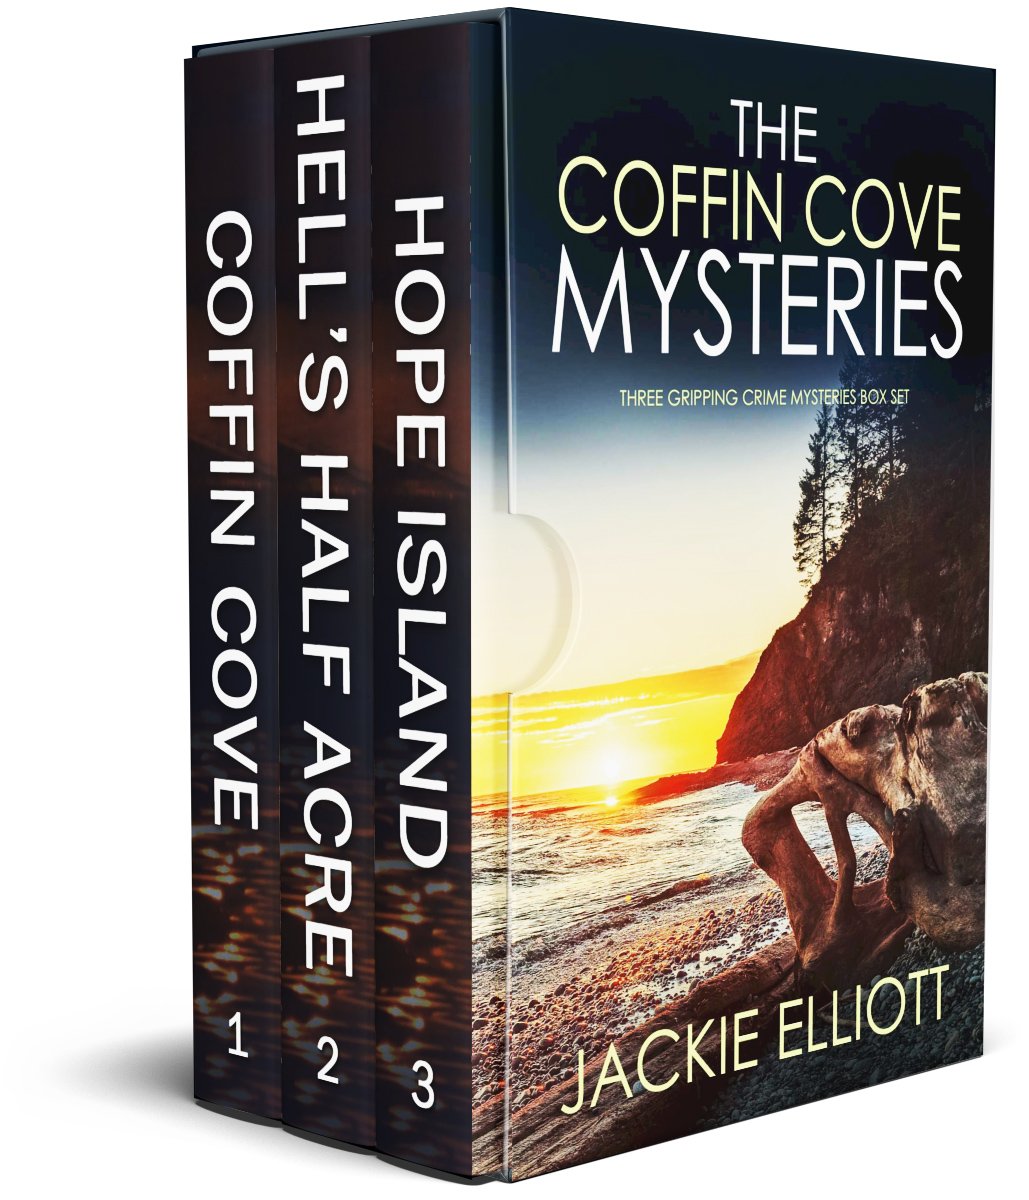 THE COFFIN COVE MYSTERIES 1-3 publish (1).jpg